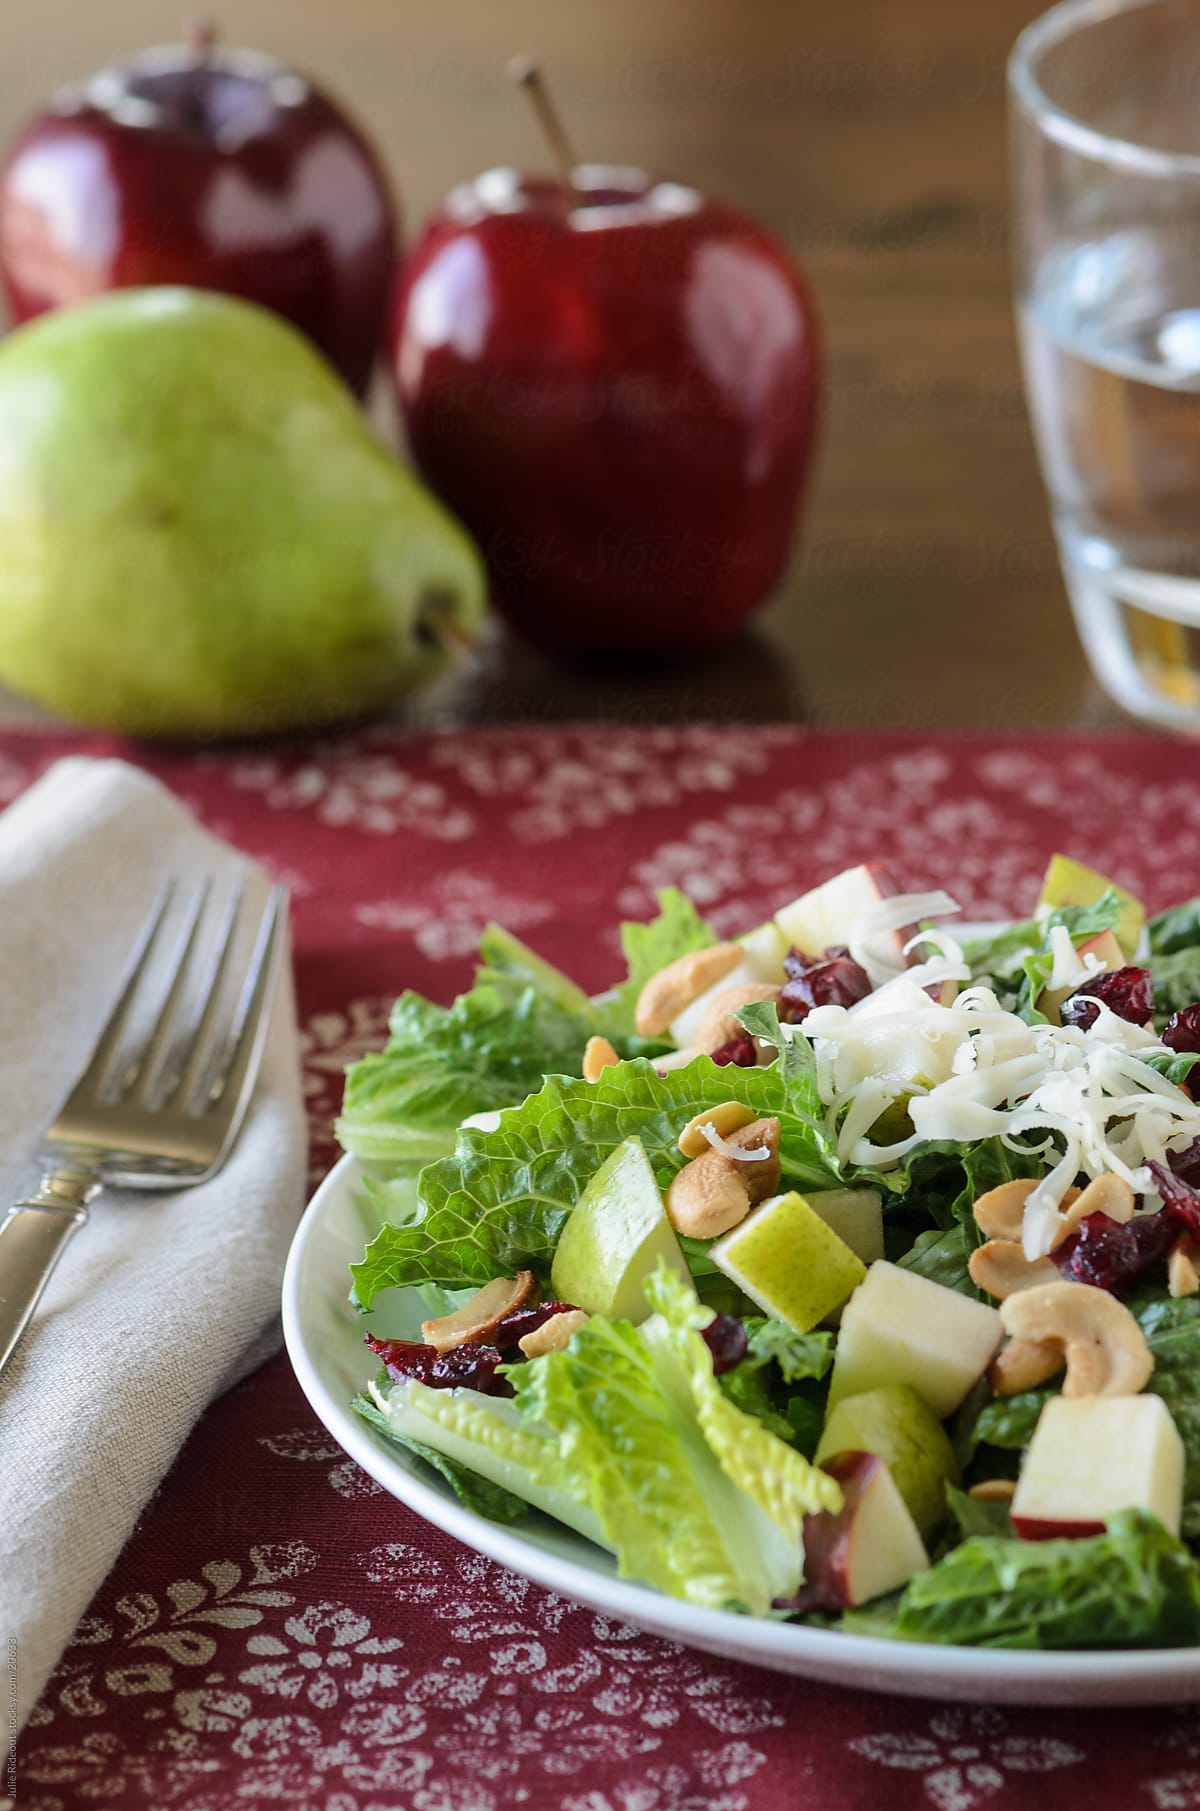 Green Salad with Apples and Pears